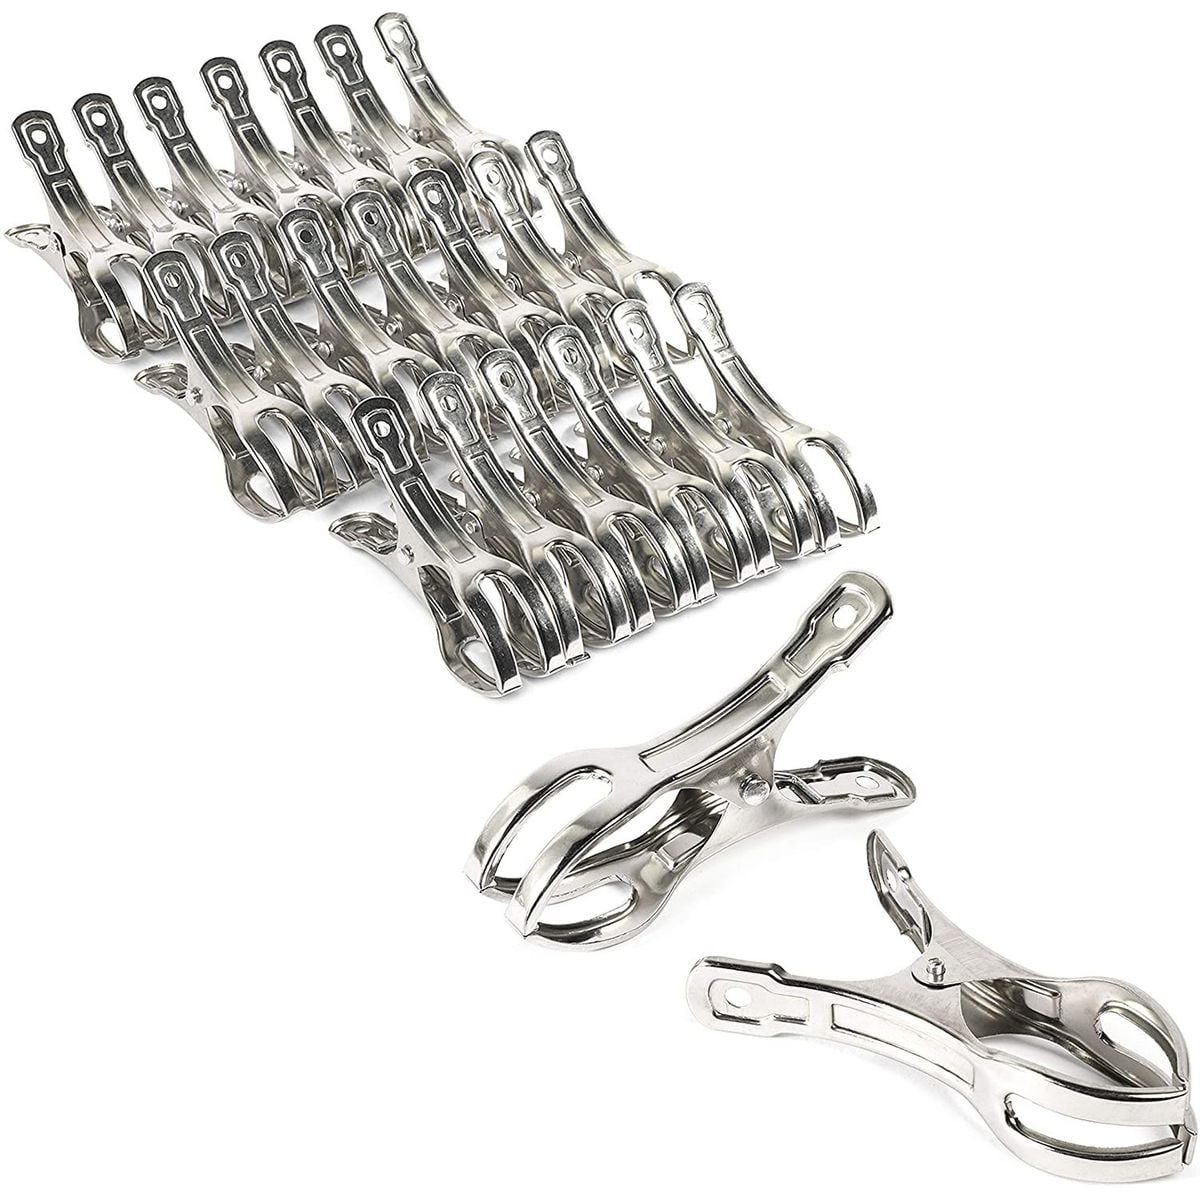 Metal clothes pins Small Stainless Steel Clothespins & Clothespin Bag